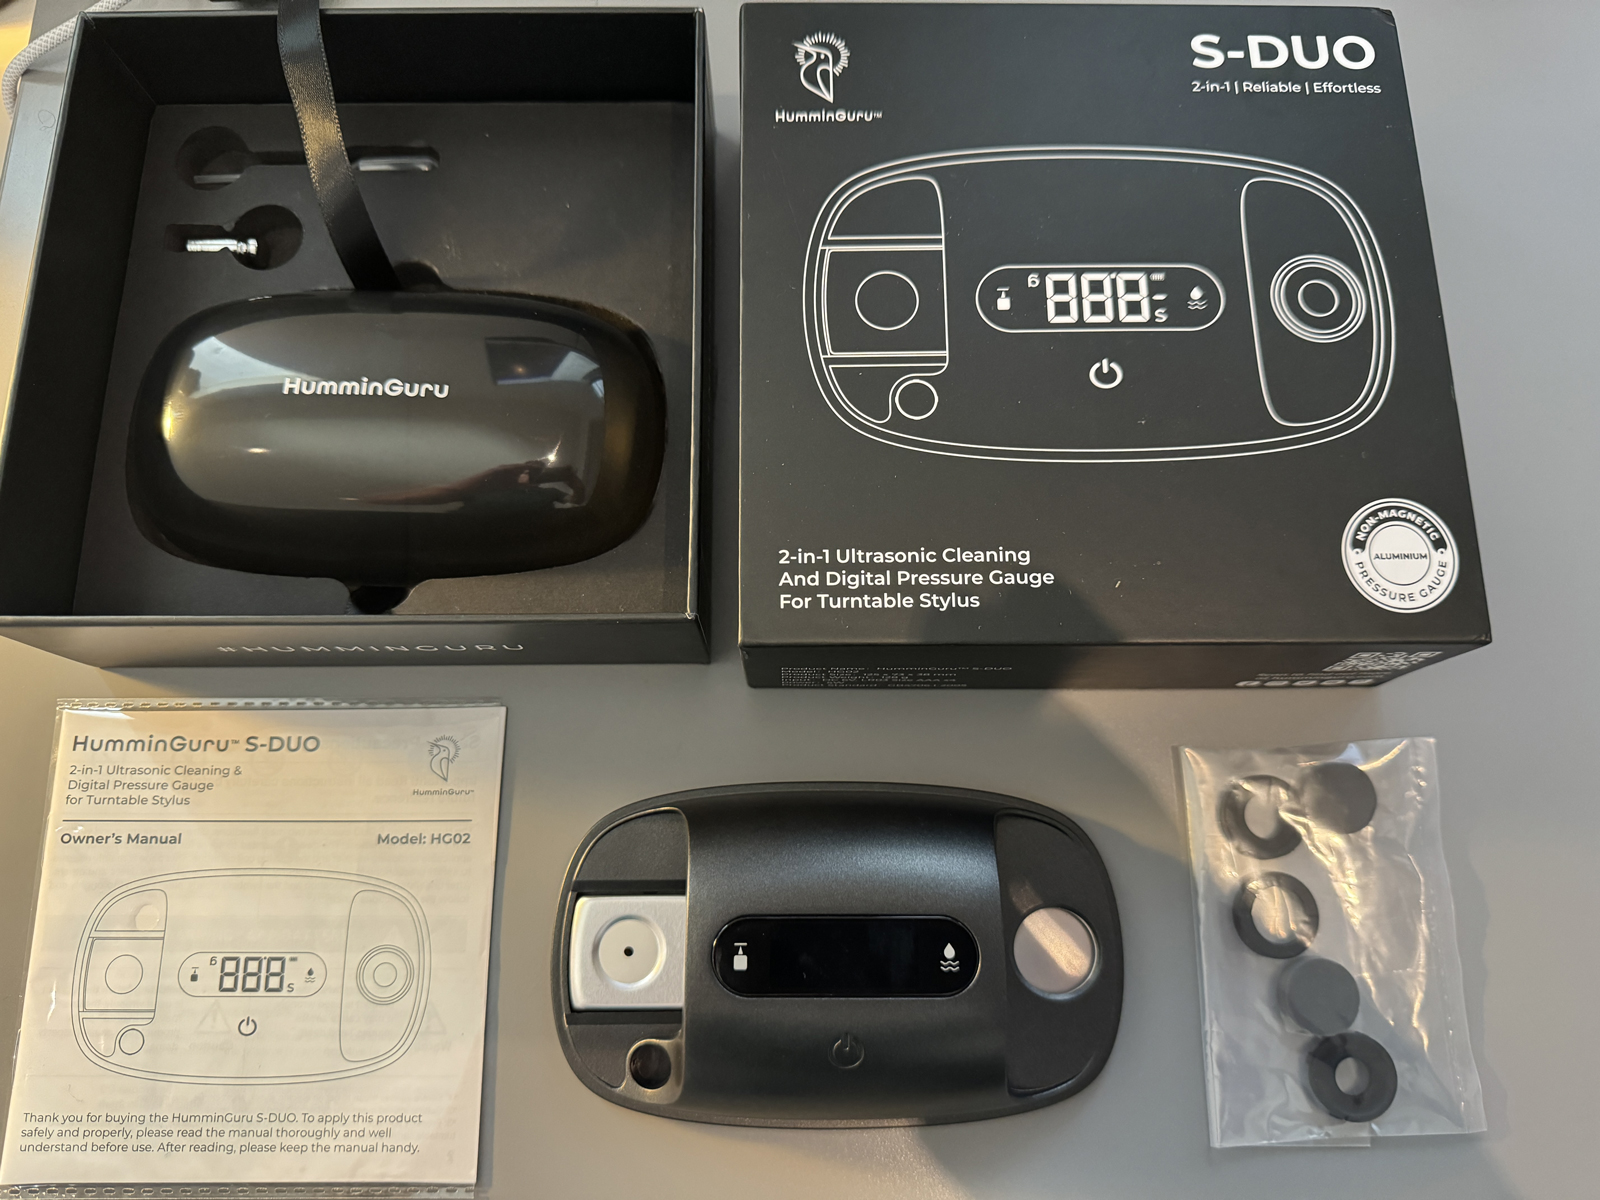 Close-up photo view of HumminGuru S-DUO ultrasonic stylus cleaner/tracking force gauge product model, its product packaging box, its accessories, and its owner's manual nearby